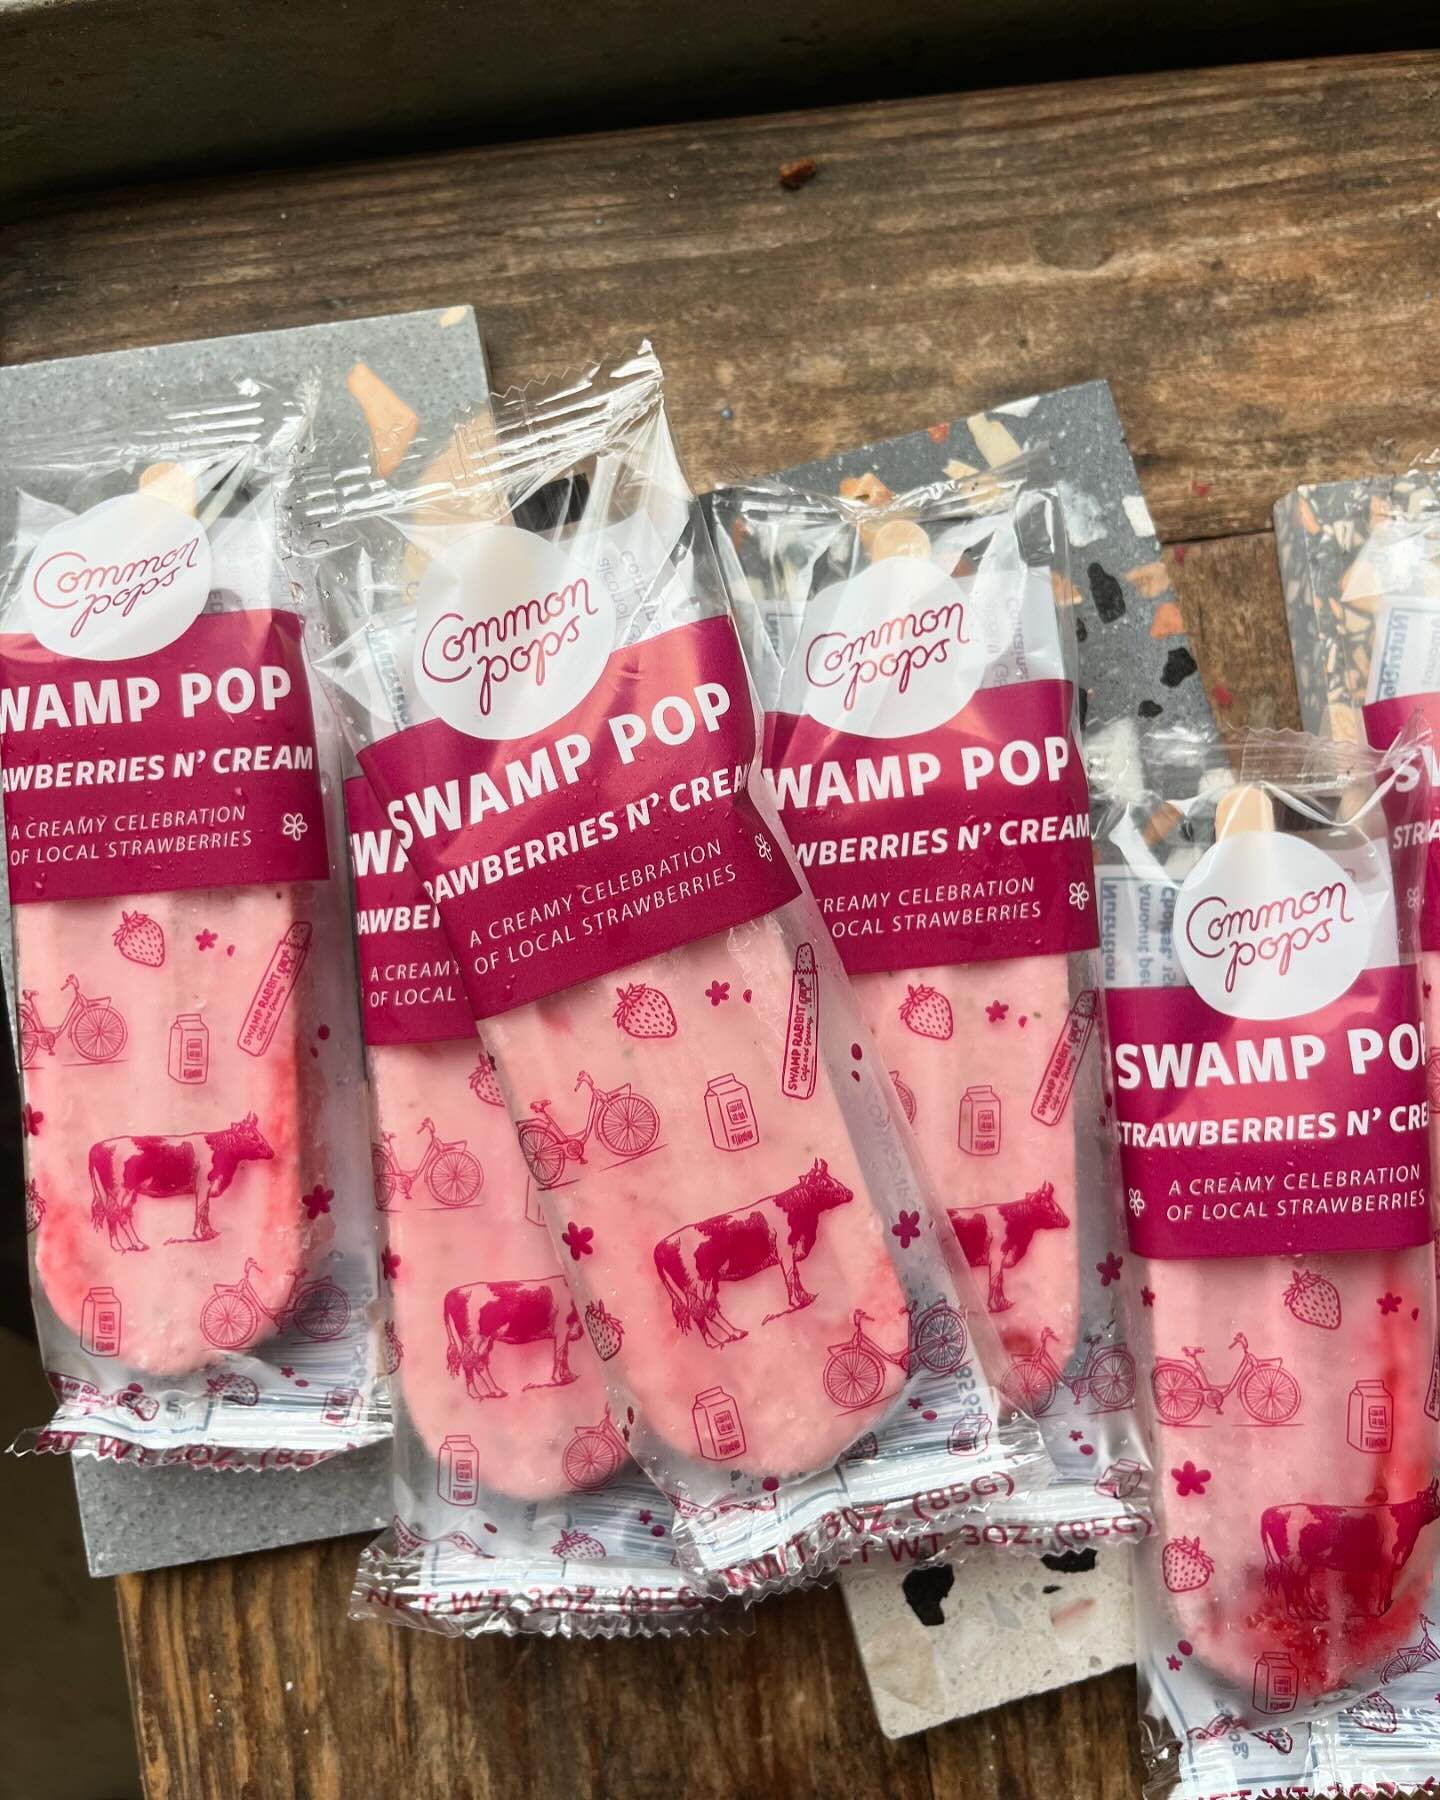 A popsicle maker and a grocer walk into a room. BAM! @commonpops x @swamprabbitcafe Swamp Pop is born! Taking one of our most favorite local fruits, the strawberry, and mixing it up with some cream and sugar, meet the ultimate popsicle jam of 2024. #